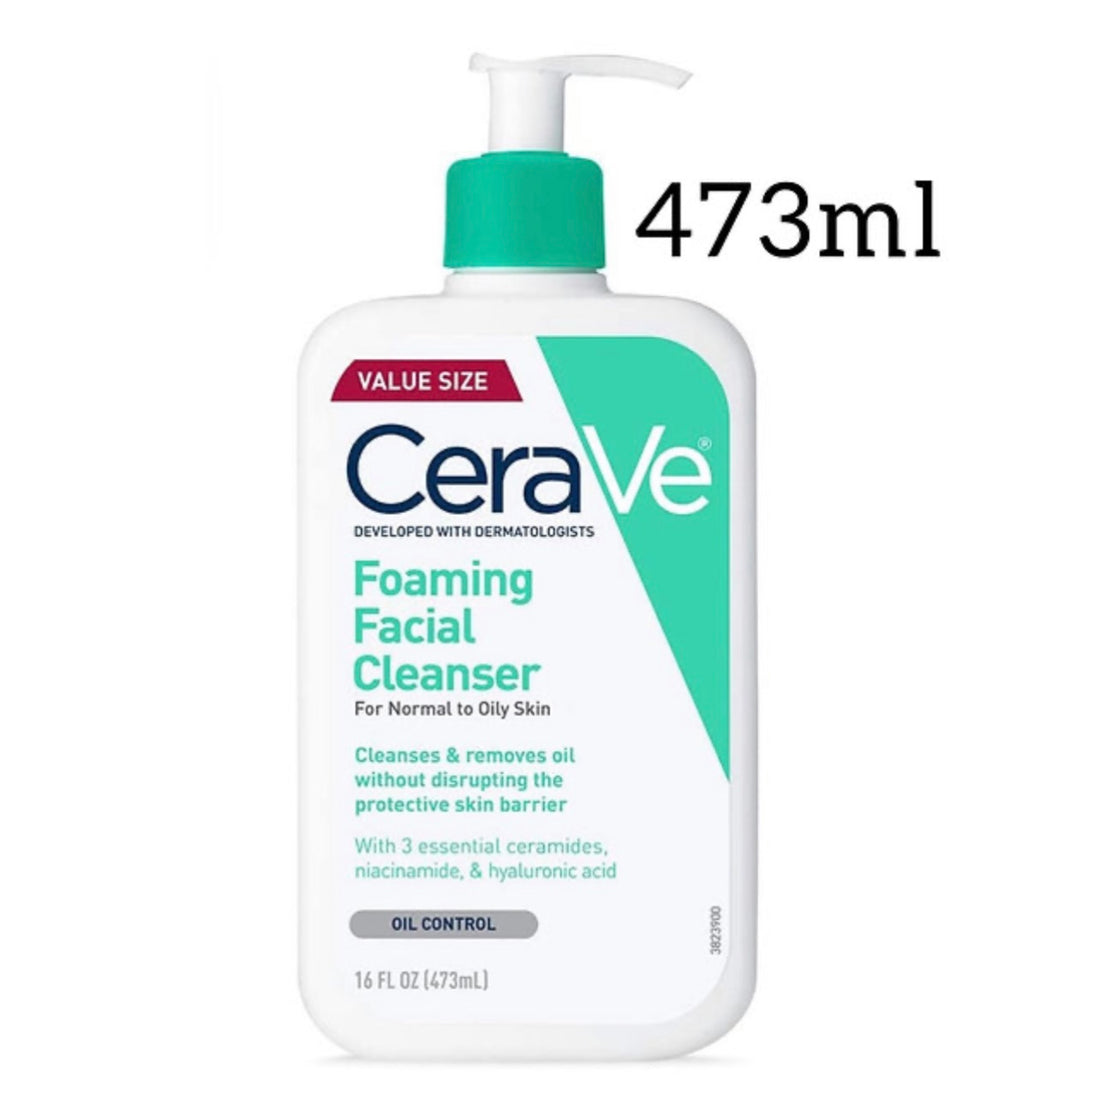 CeraVe Foaming Facial Cleanser (5 sizes)